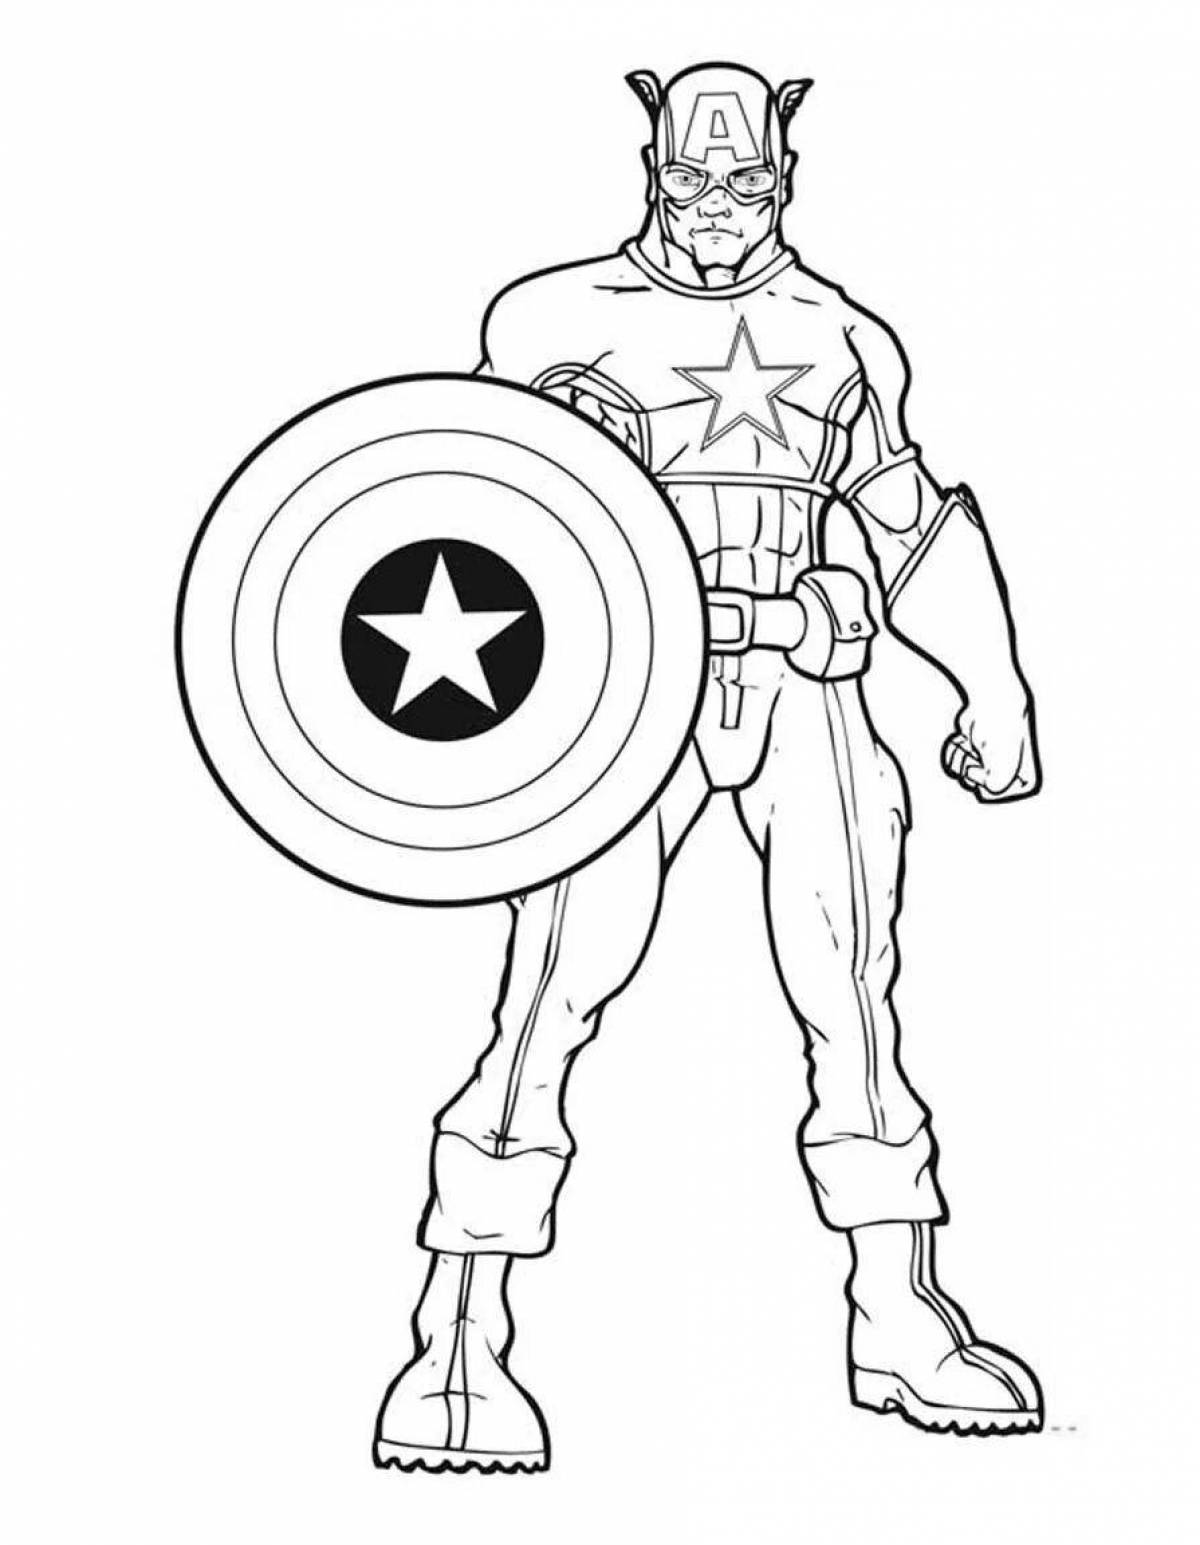 Coloring page elegant spider-man and captain america